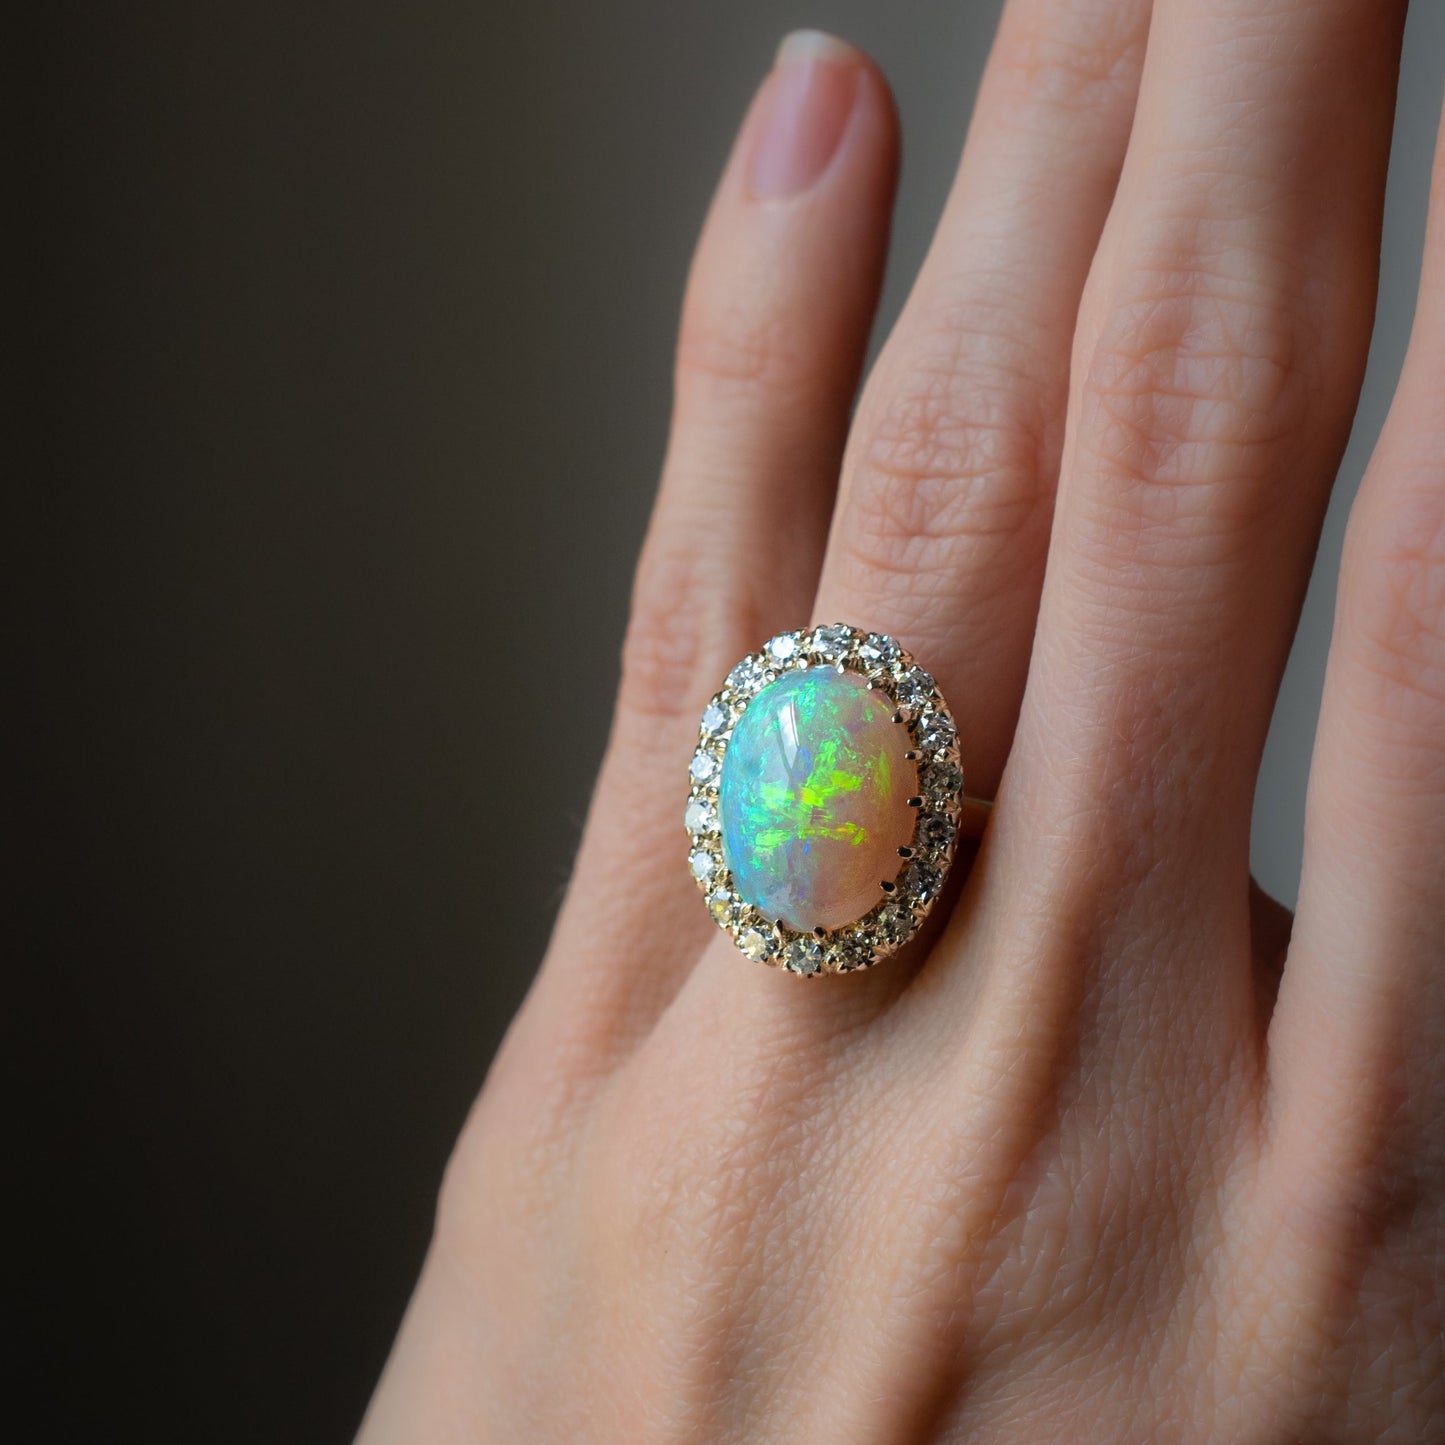 The City Lights Opal Ring